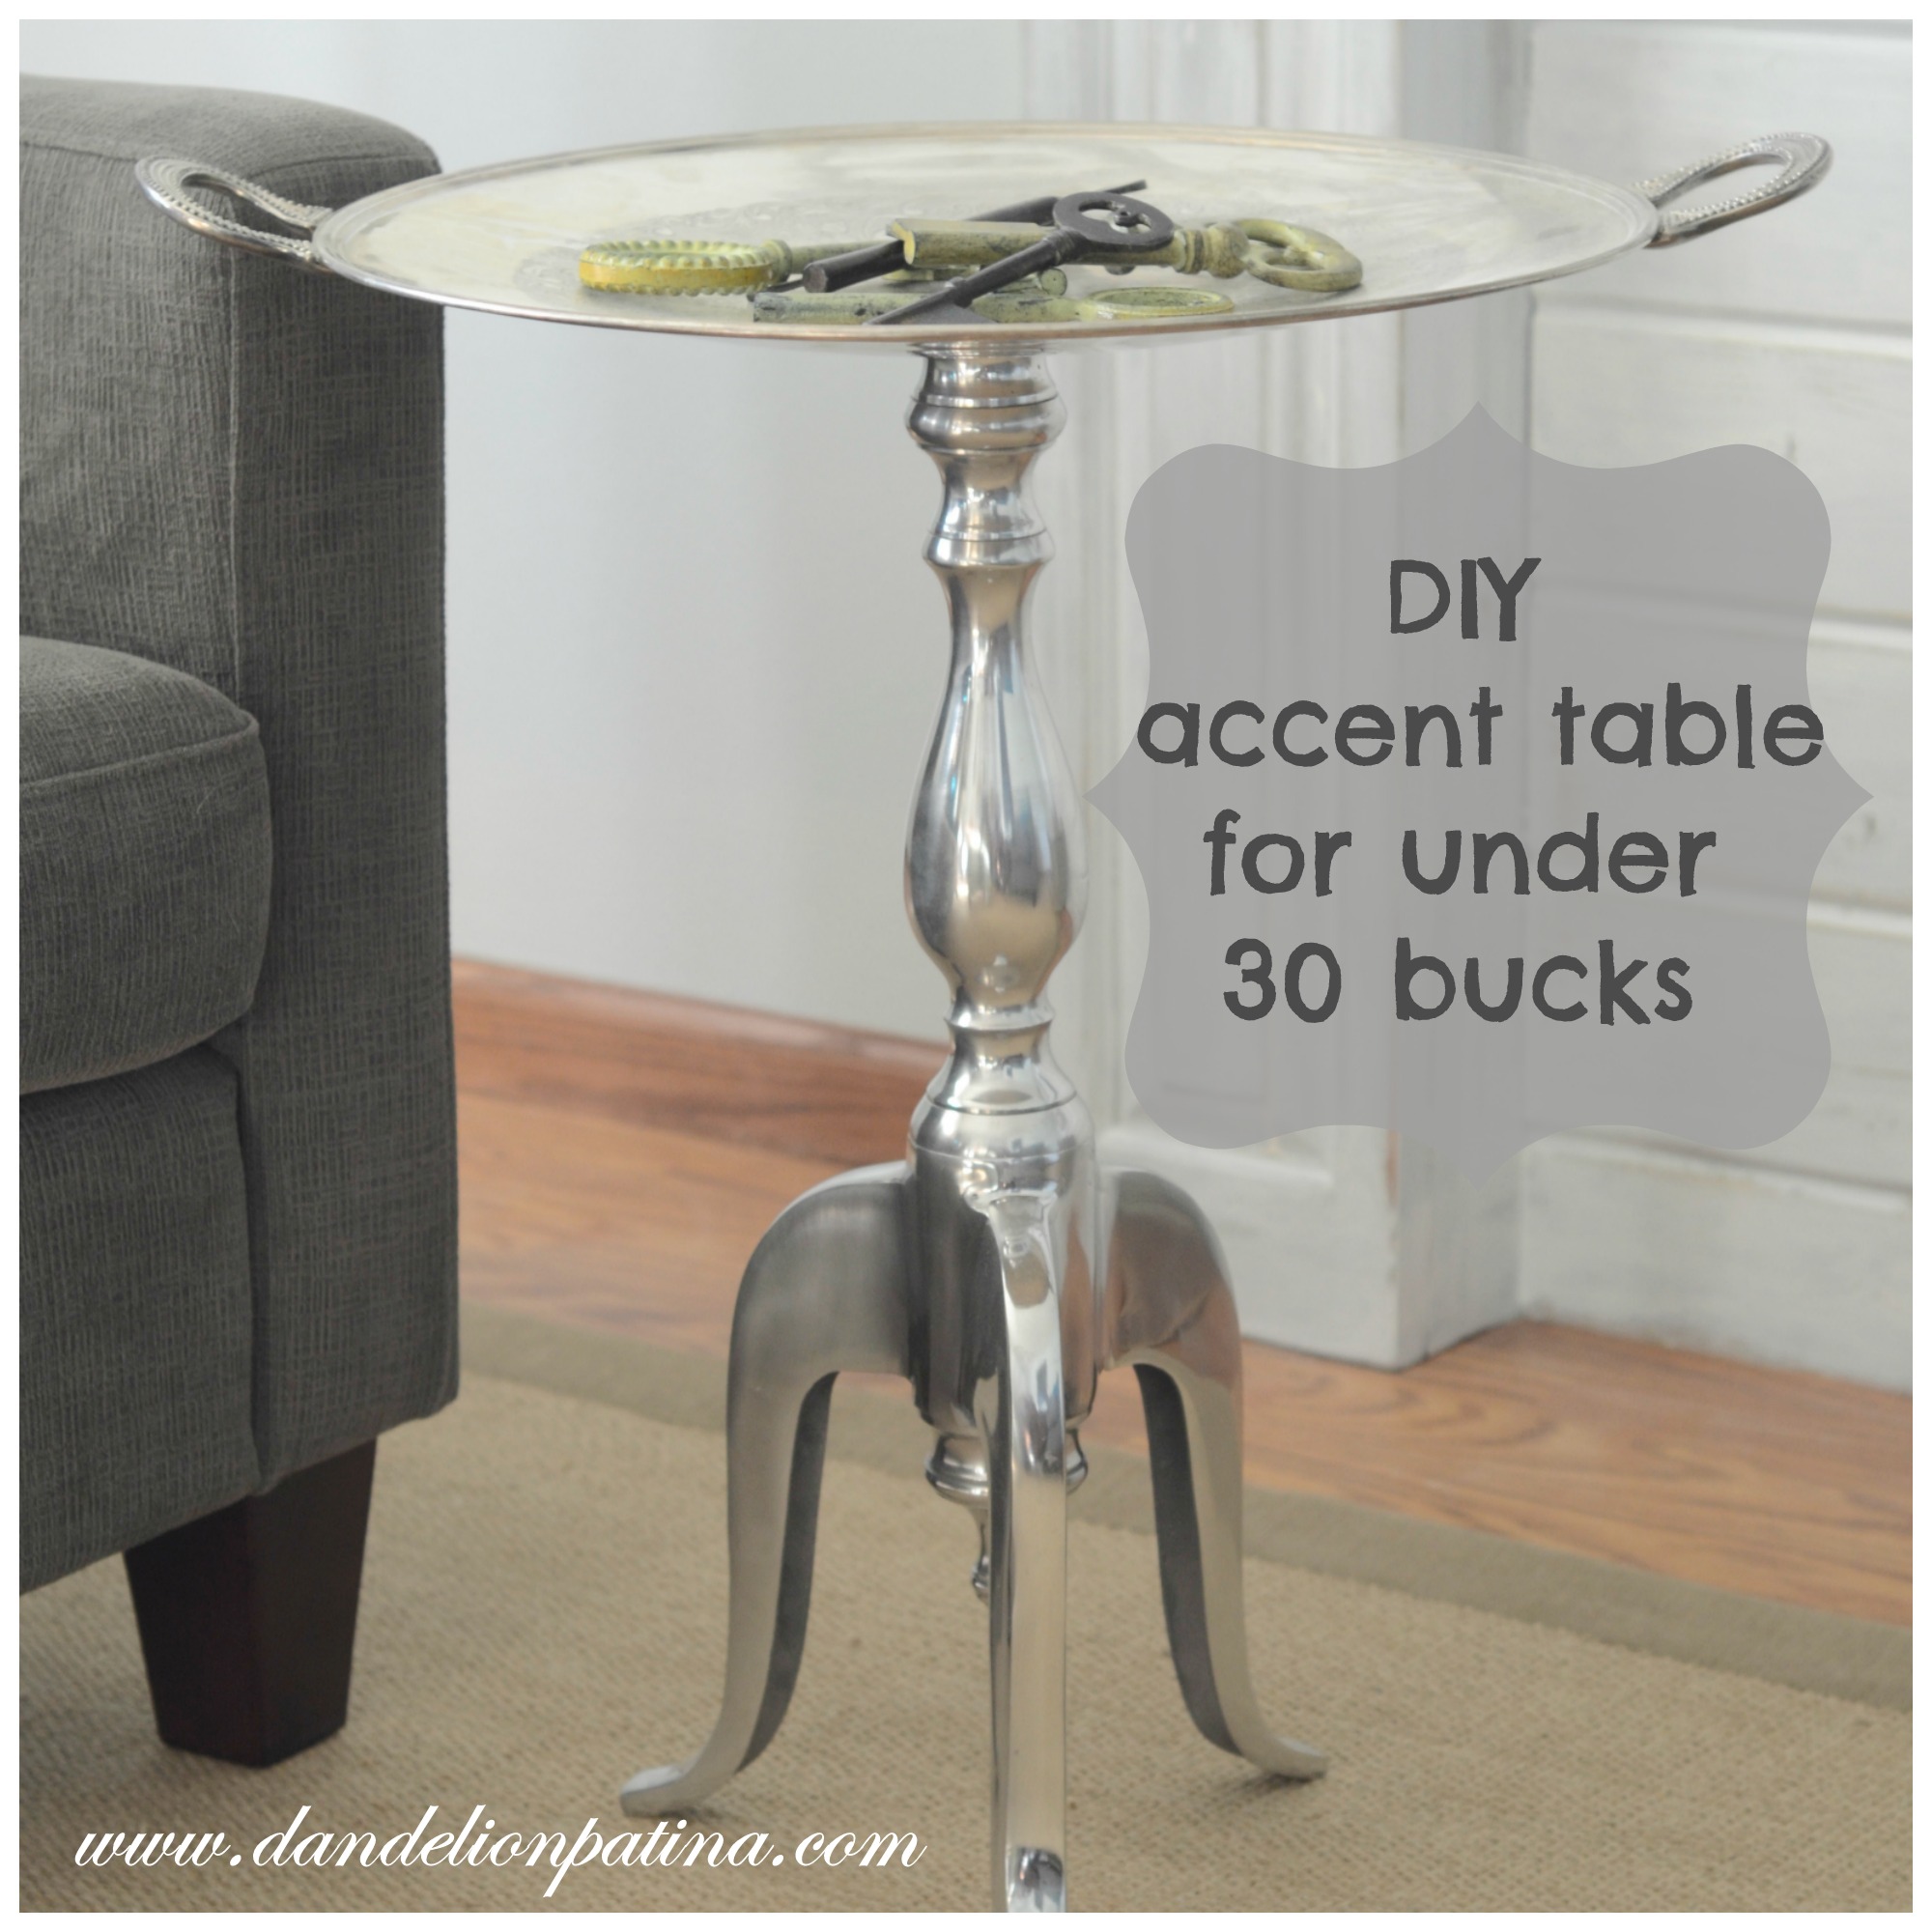 diy metal accent table dandelion patina bucks rectangle patio cover white resin wicker side drawer nightstand chrome nautical lights tablecloths for large round tables unique